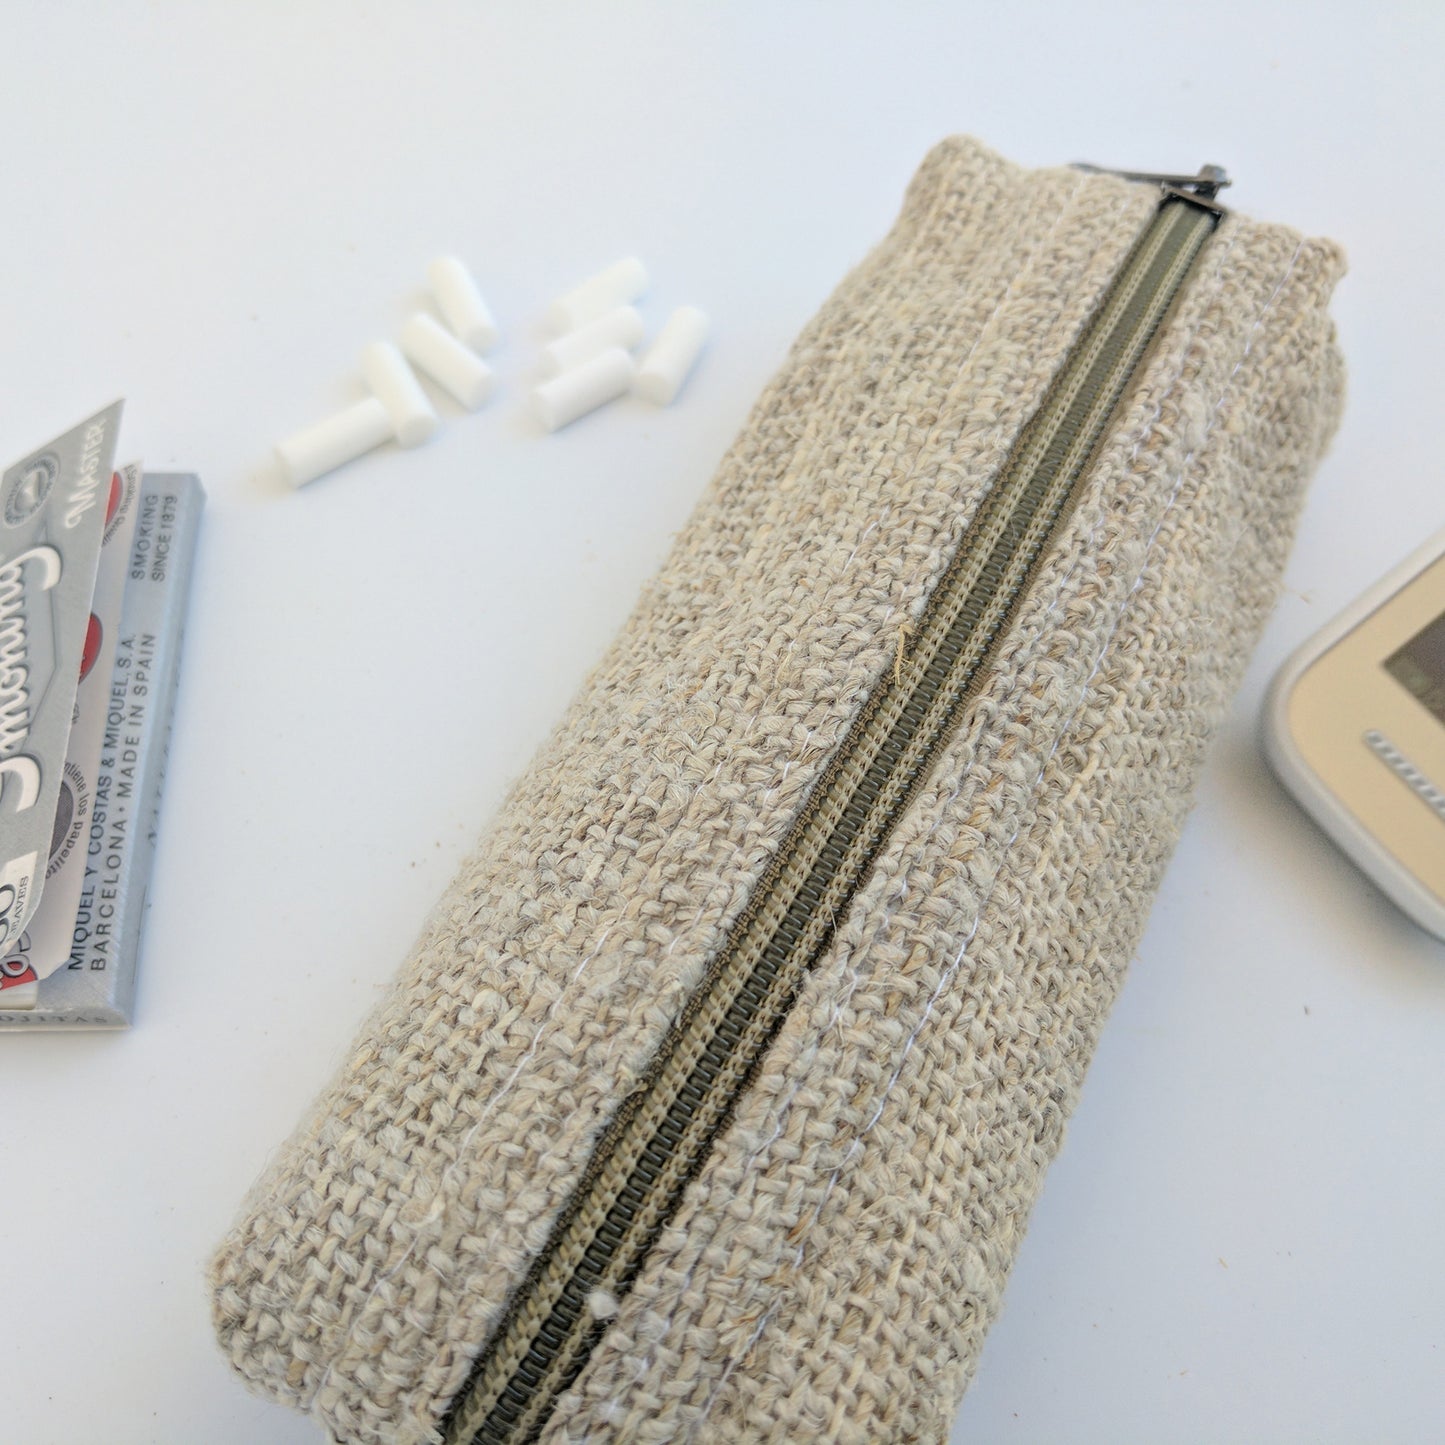 HEMP Pencil Pouch made from 100% natural, organic and eco-friendly handwoven HEMP